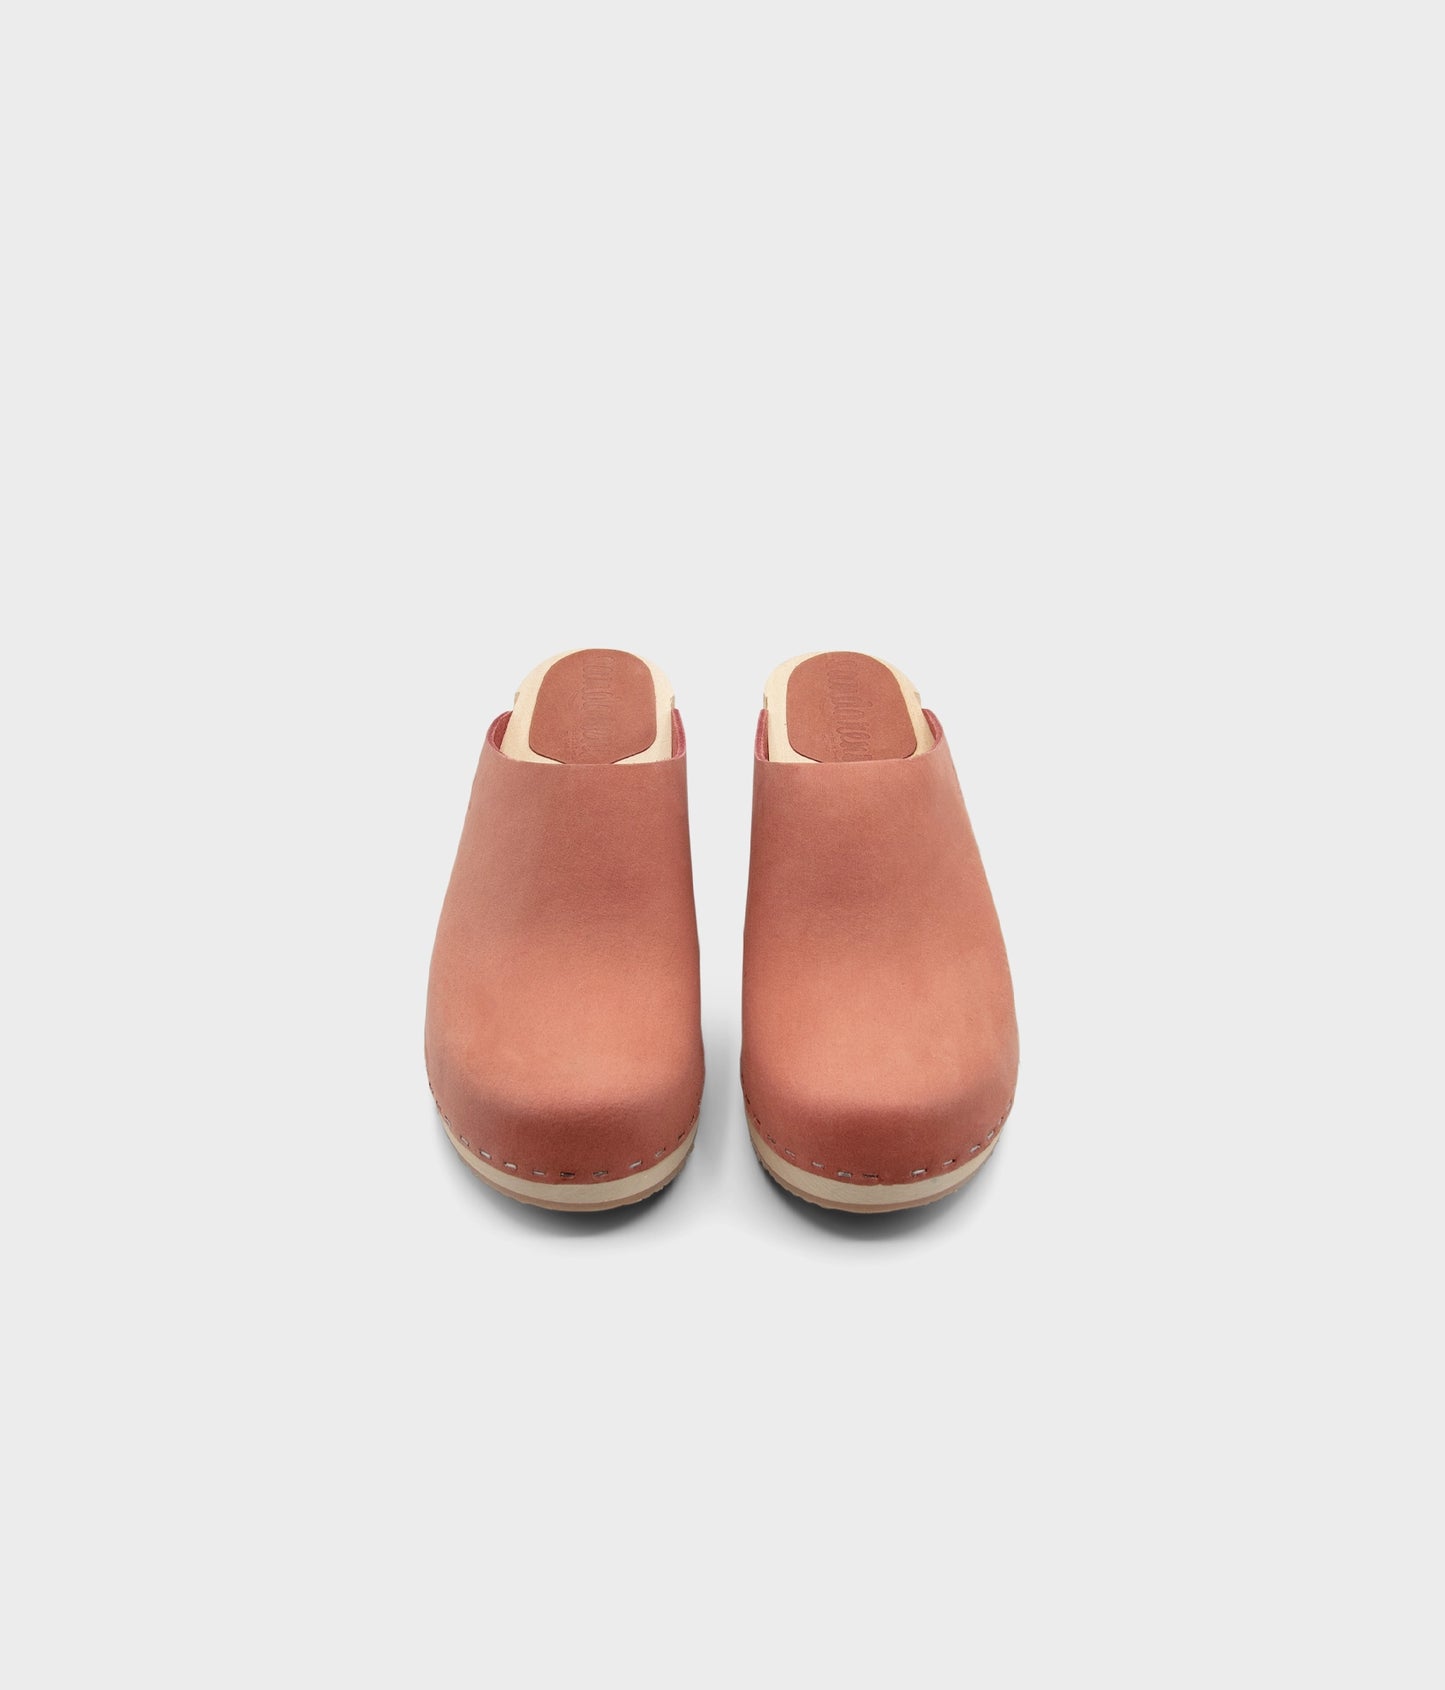 low heeled minimalistic clog mules in blush pink nubuck leather stapled on a light wooden base